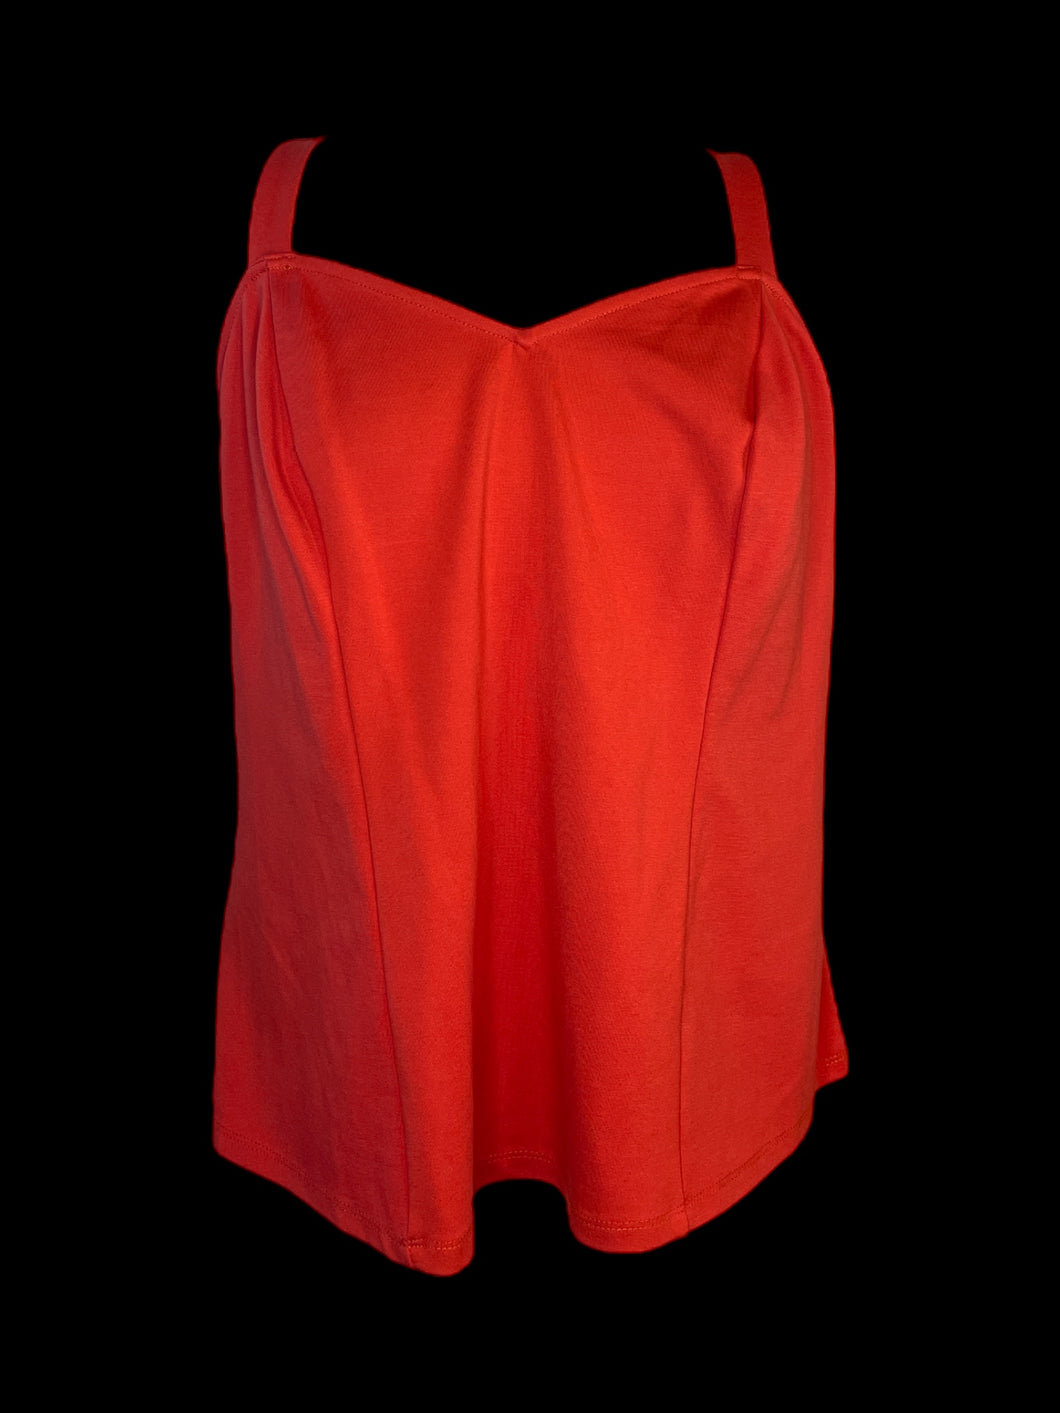 XL NWT Carrot orange sleeveless sweetheart neckline top w/ crossing straps, & formed bust